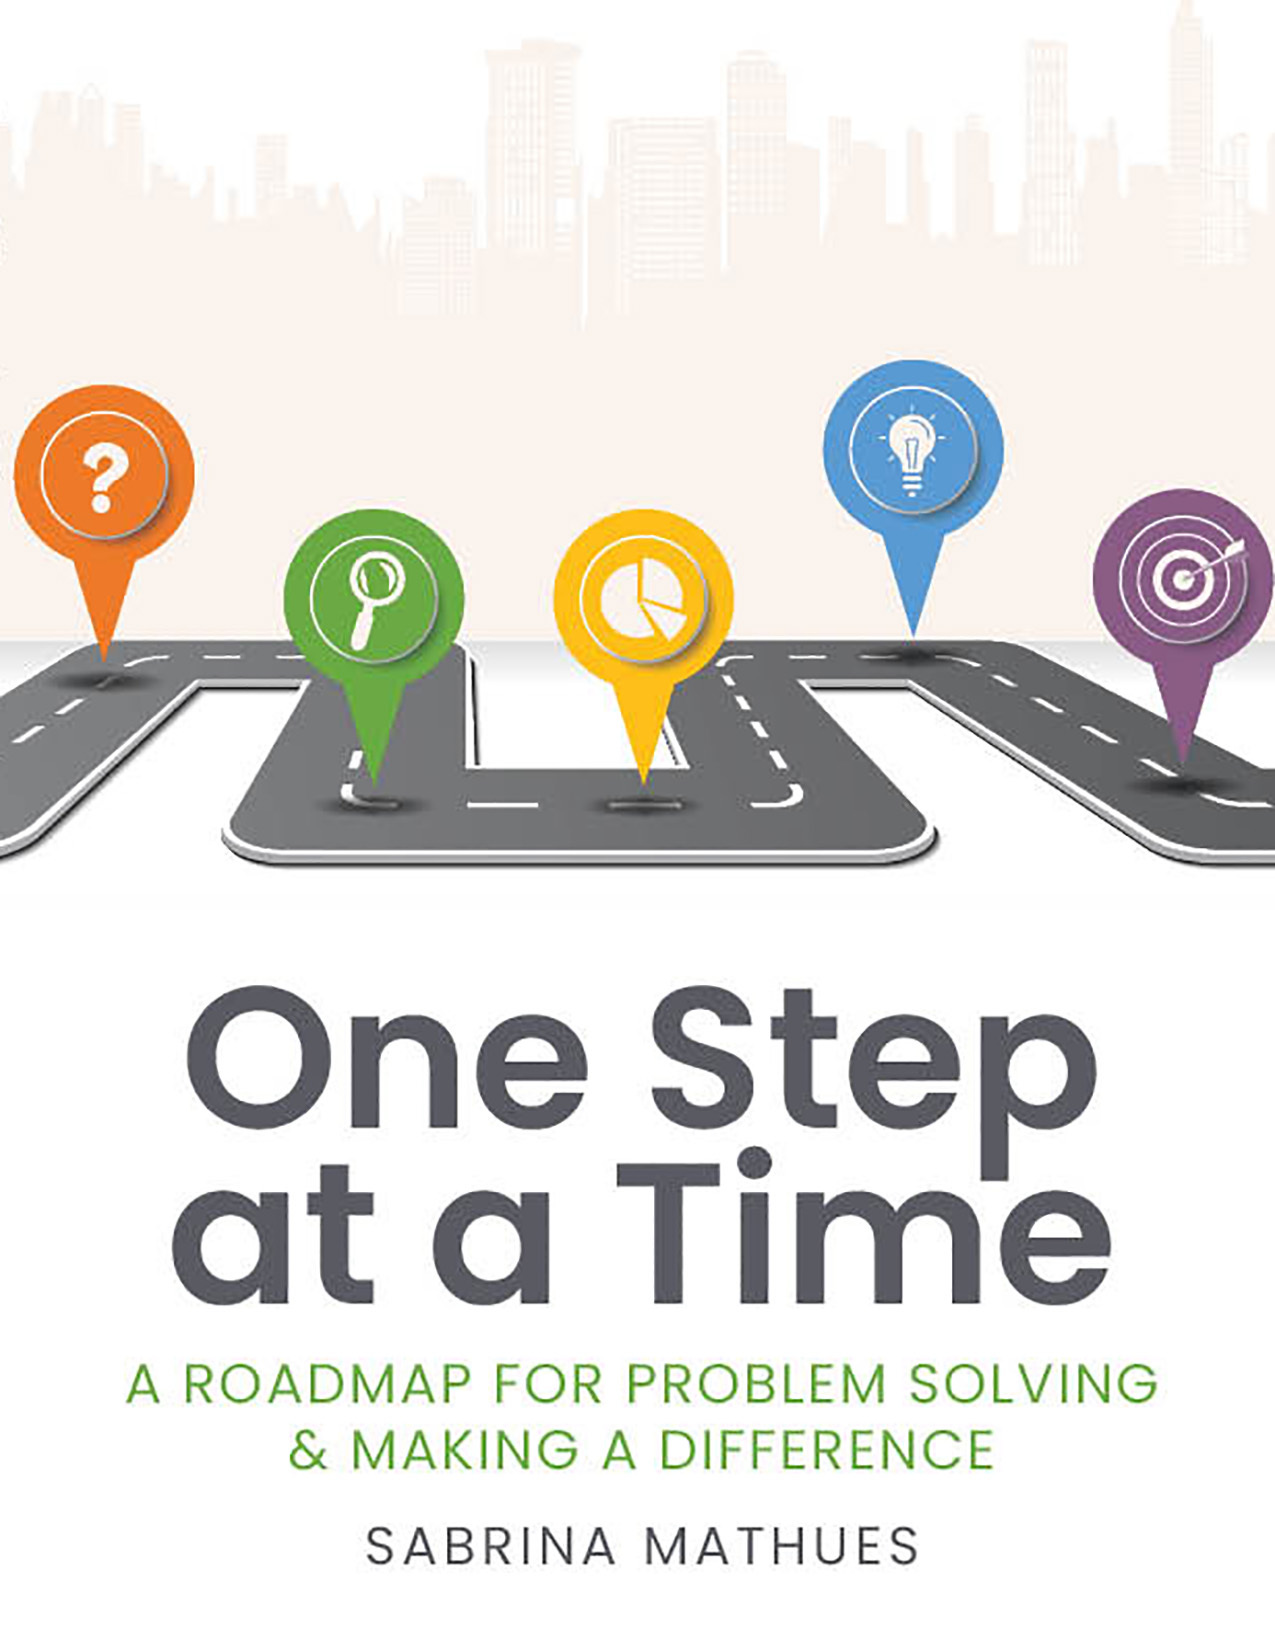 One Step at a Time: A Roadmap for Problem Solving & Making a Difference